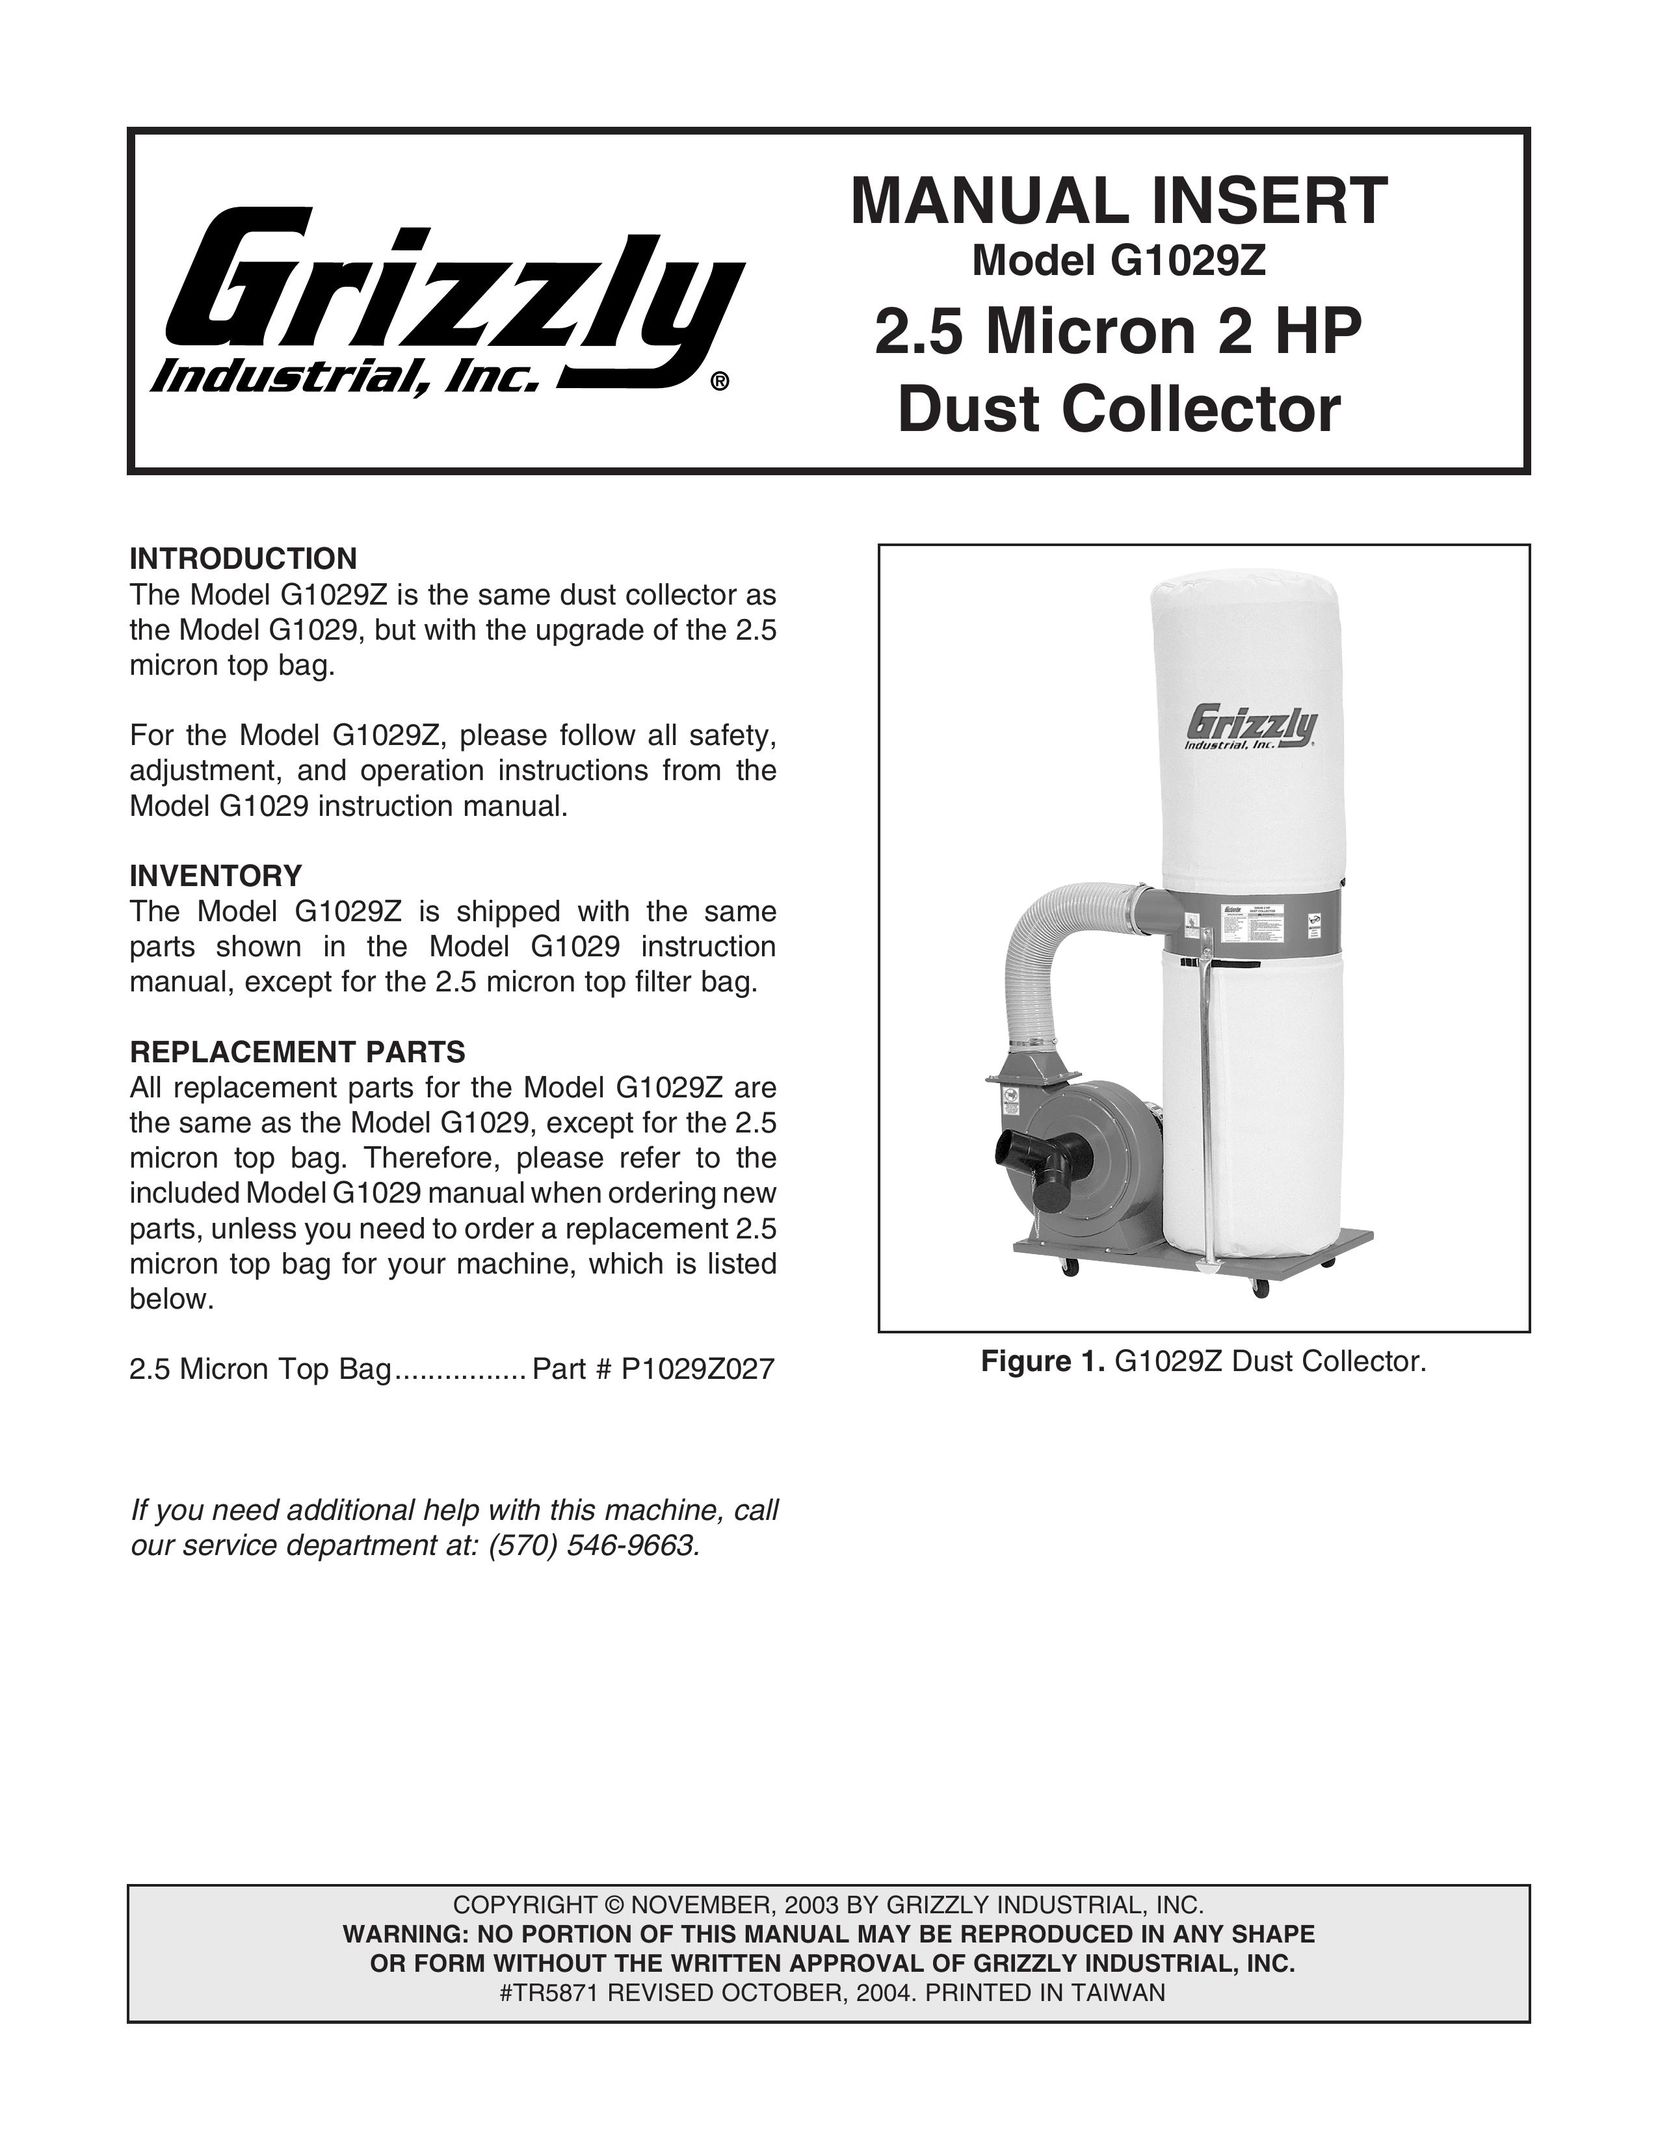 Grizzly G1029Z Dust Collector User Manual